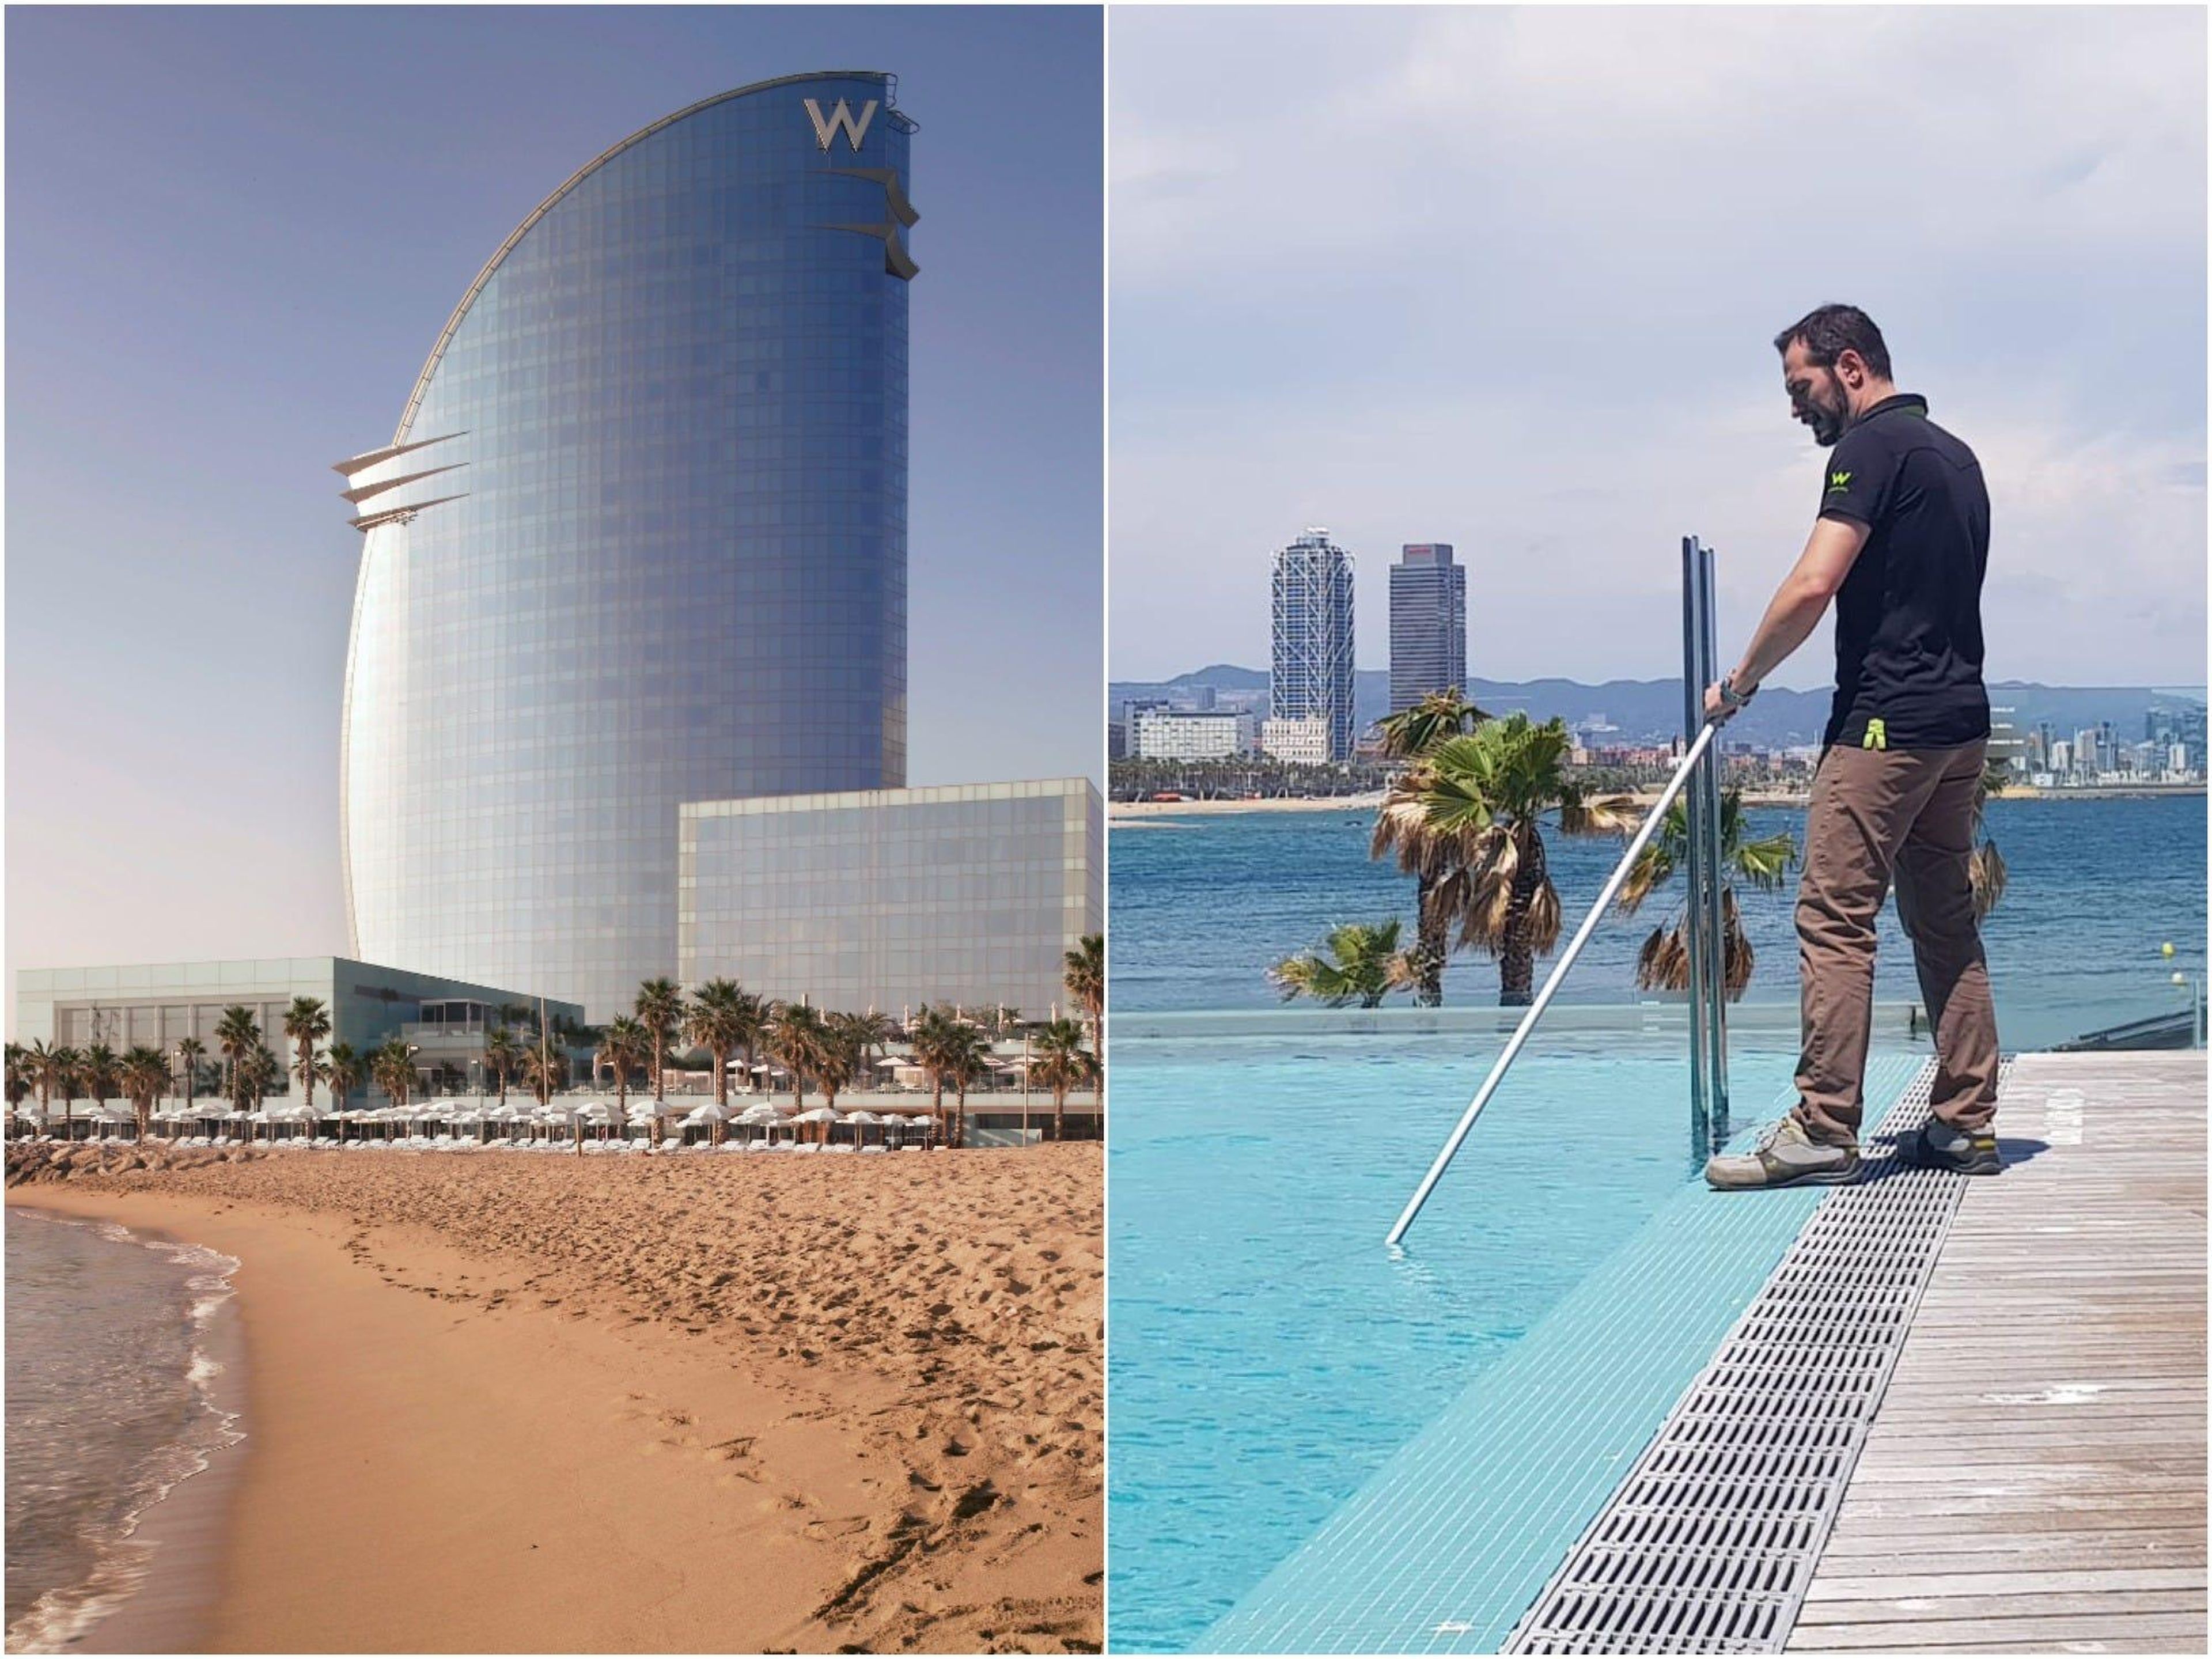 Daniel Ordóñez has been the only person living in the W Barcelona for three months.